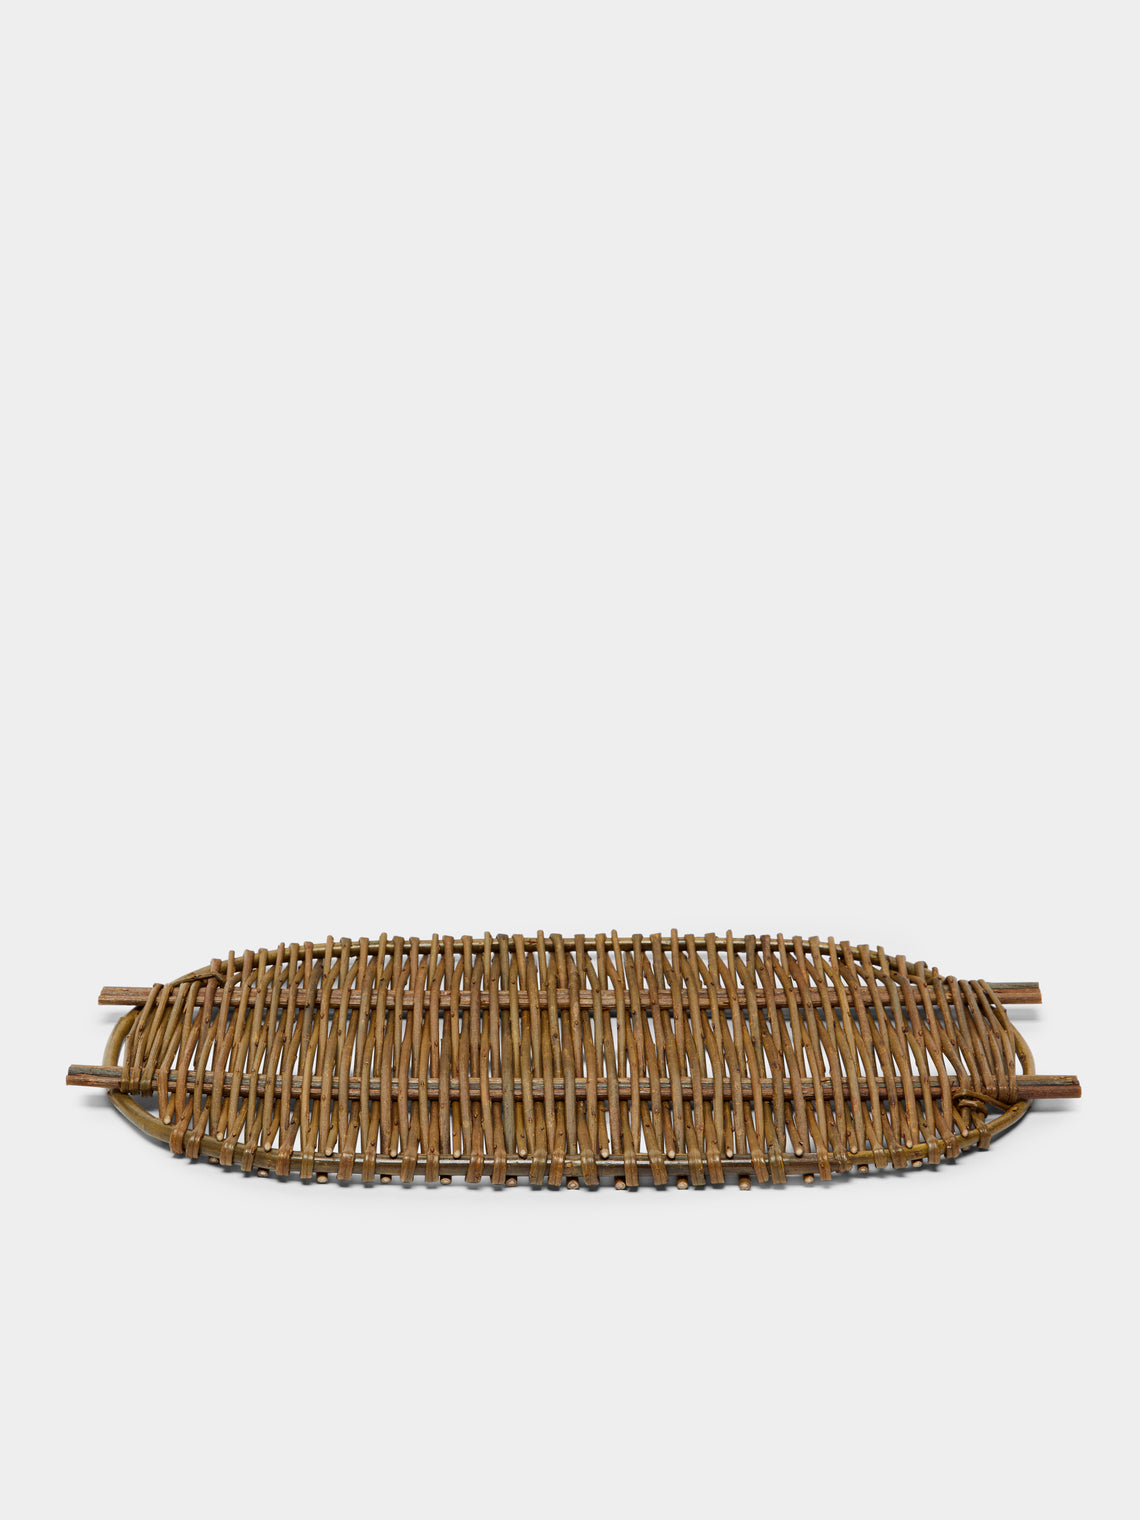 Hopewood Baskets - Handwoven Willow Tray -  - ABASK